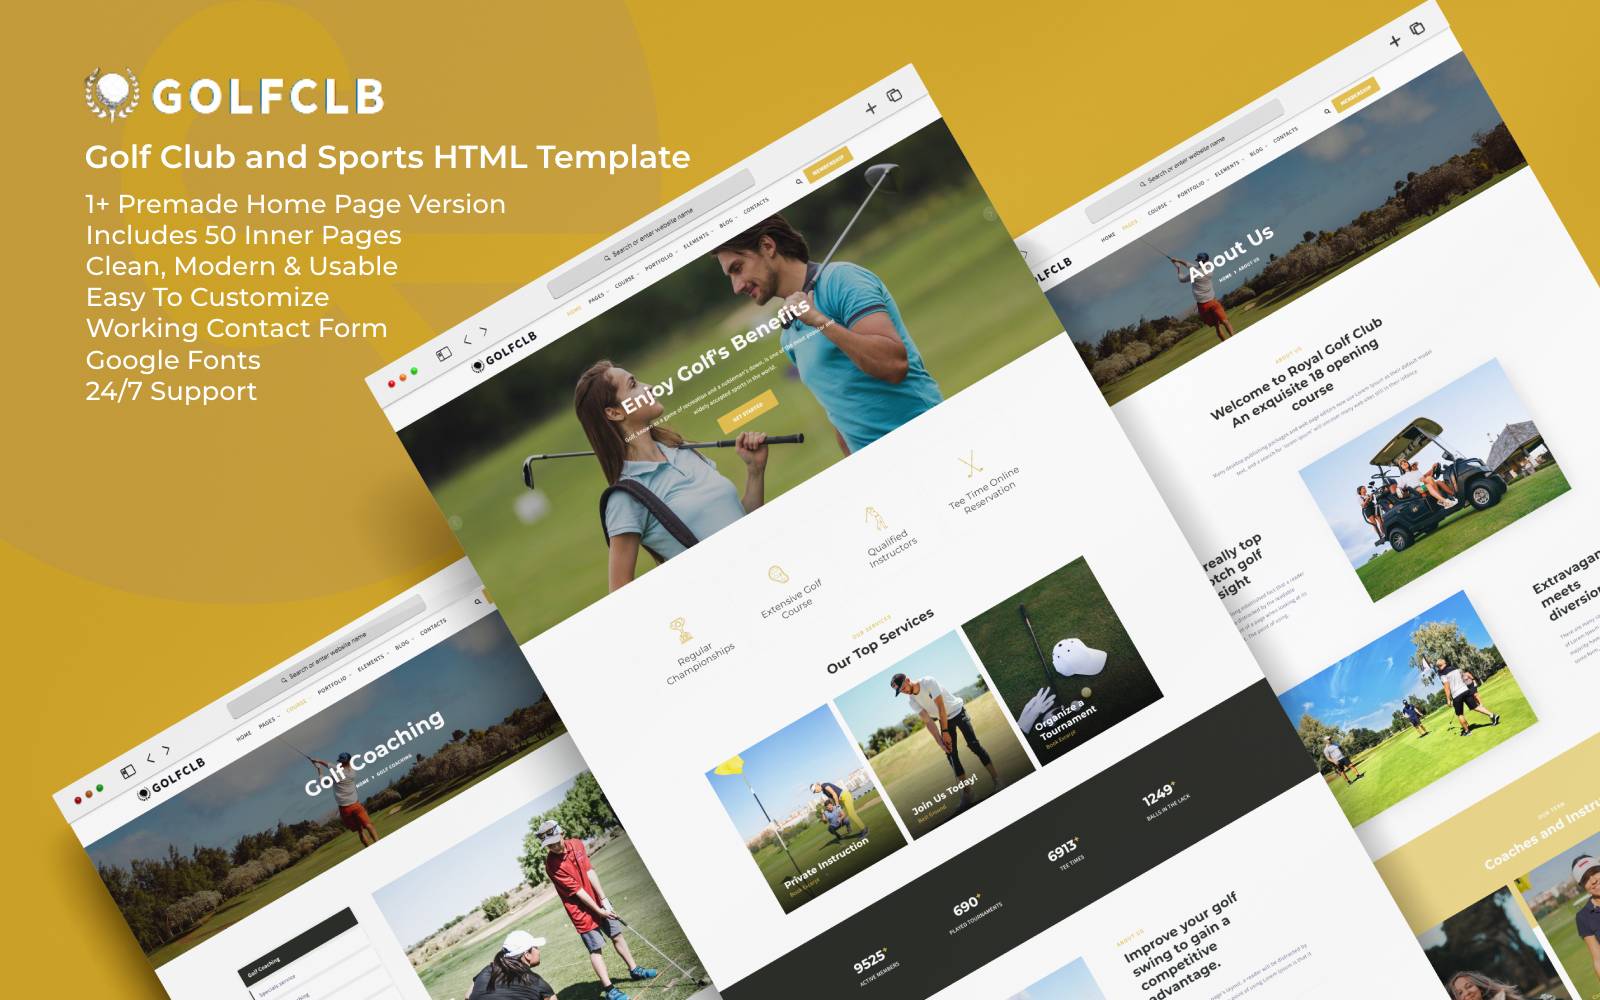 Golfclb - Golf Club and Sports HTML Template